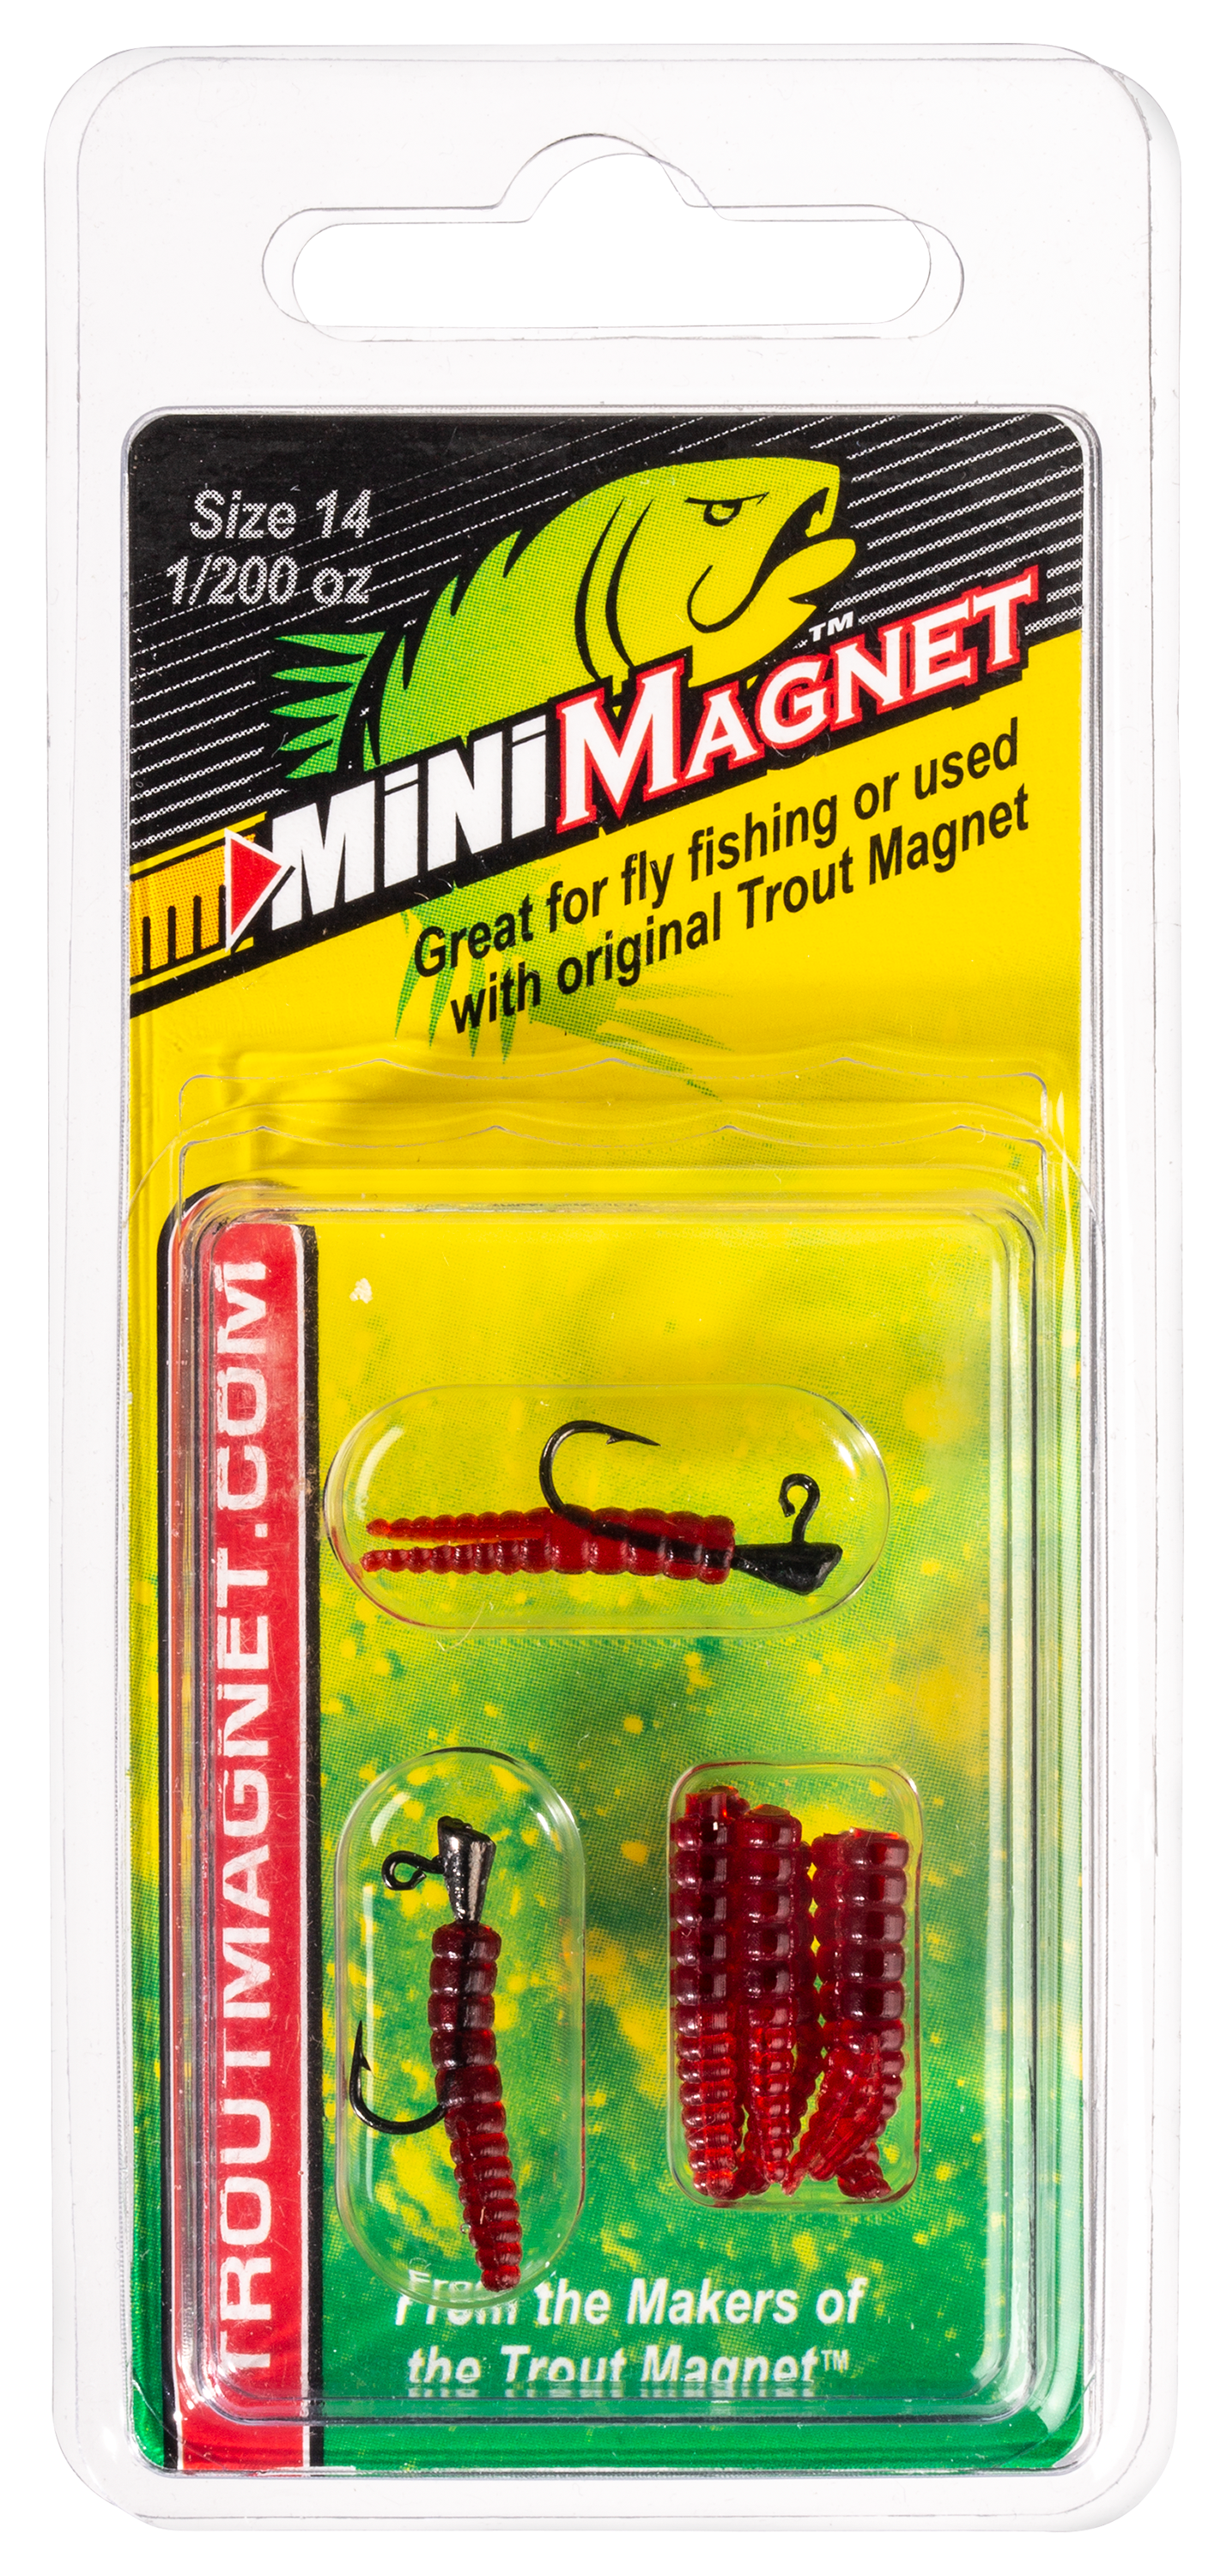 Trout Magnet Mini Magnet Jig - Red